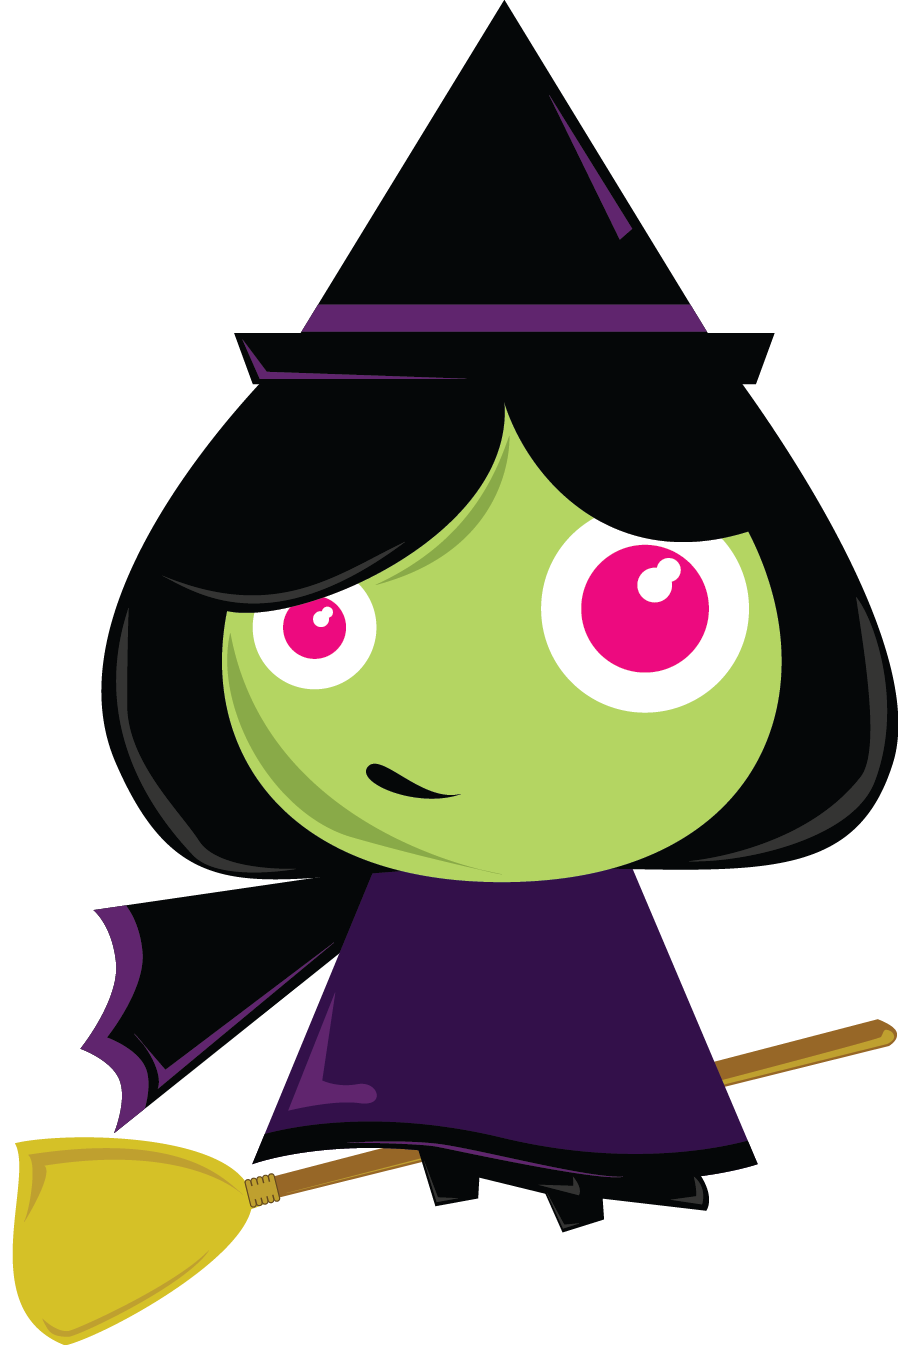 Witch. ValueClips Clip Art